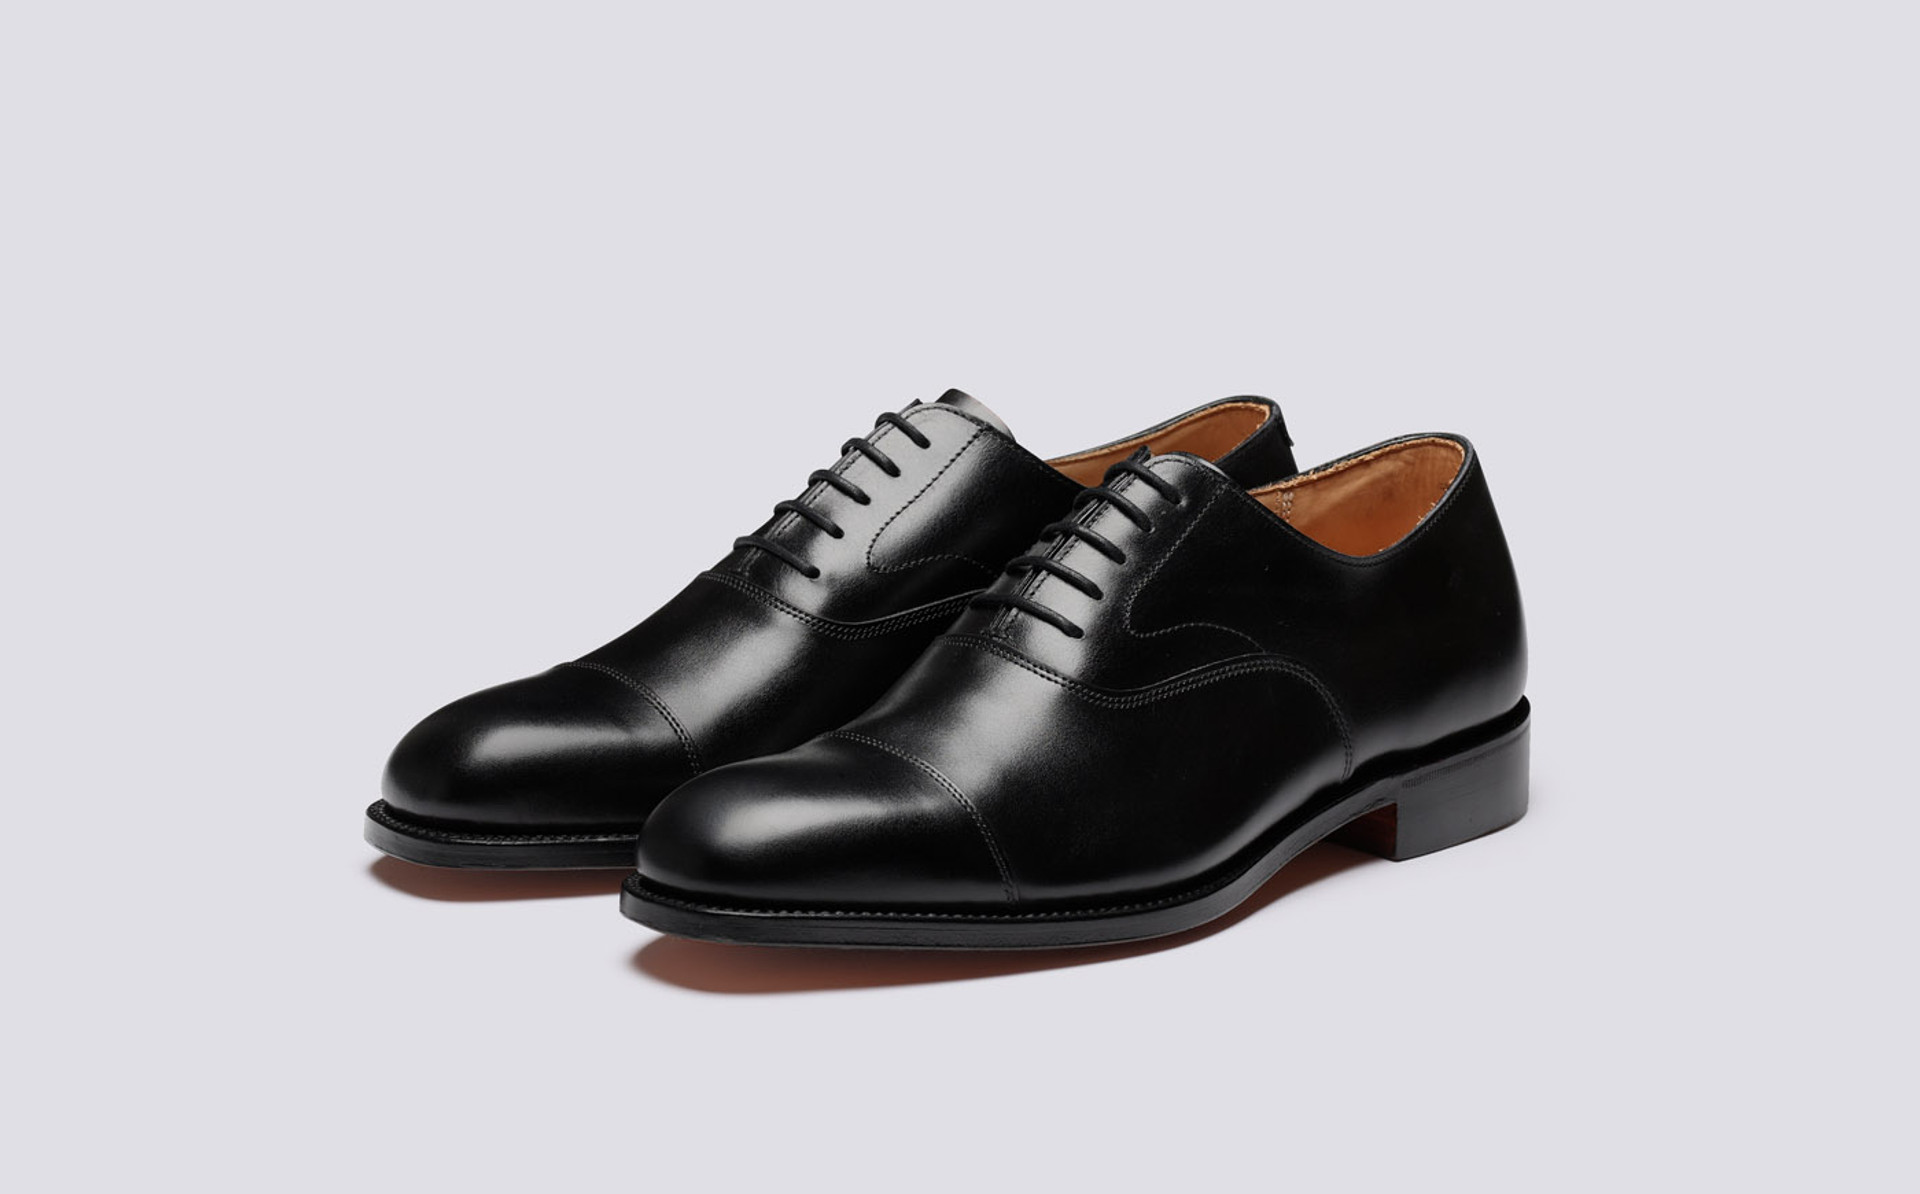 Cambridge | Formal Shoes for Men in Black Leather | Grenson